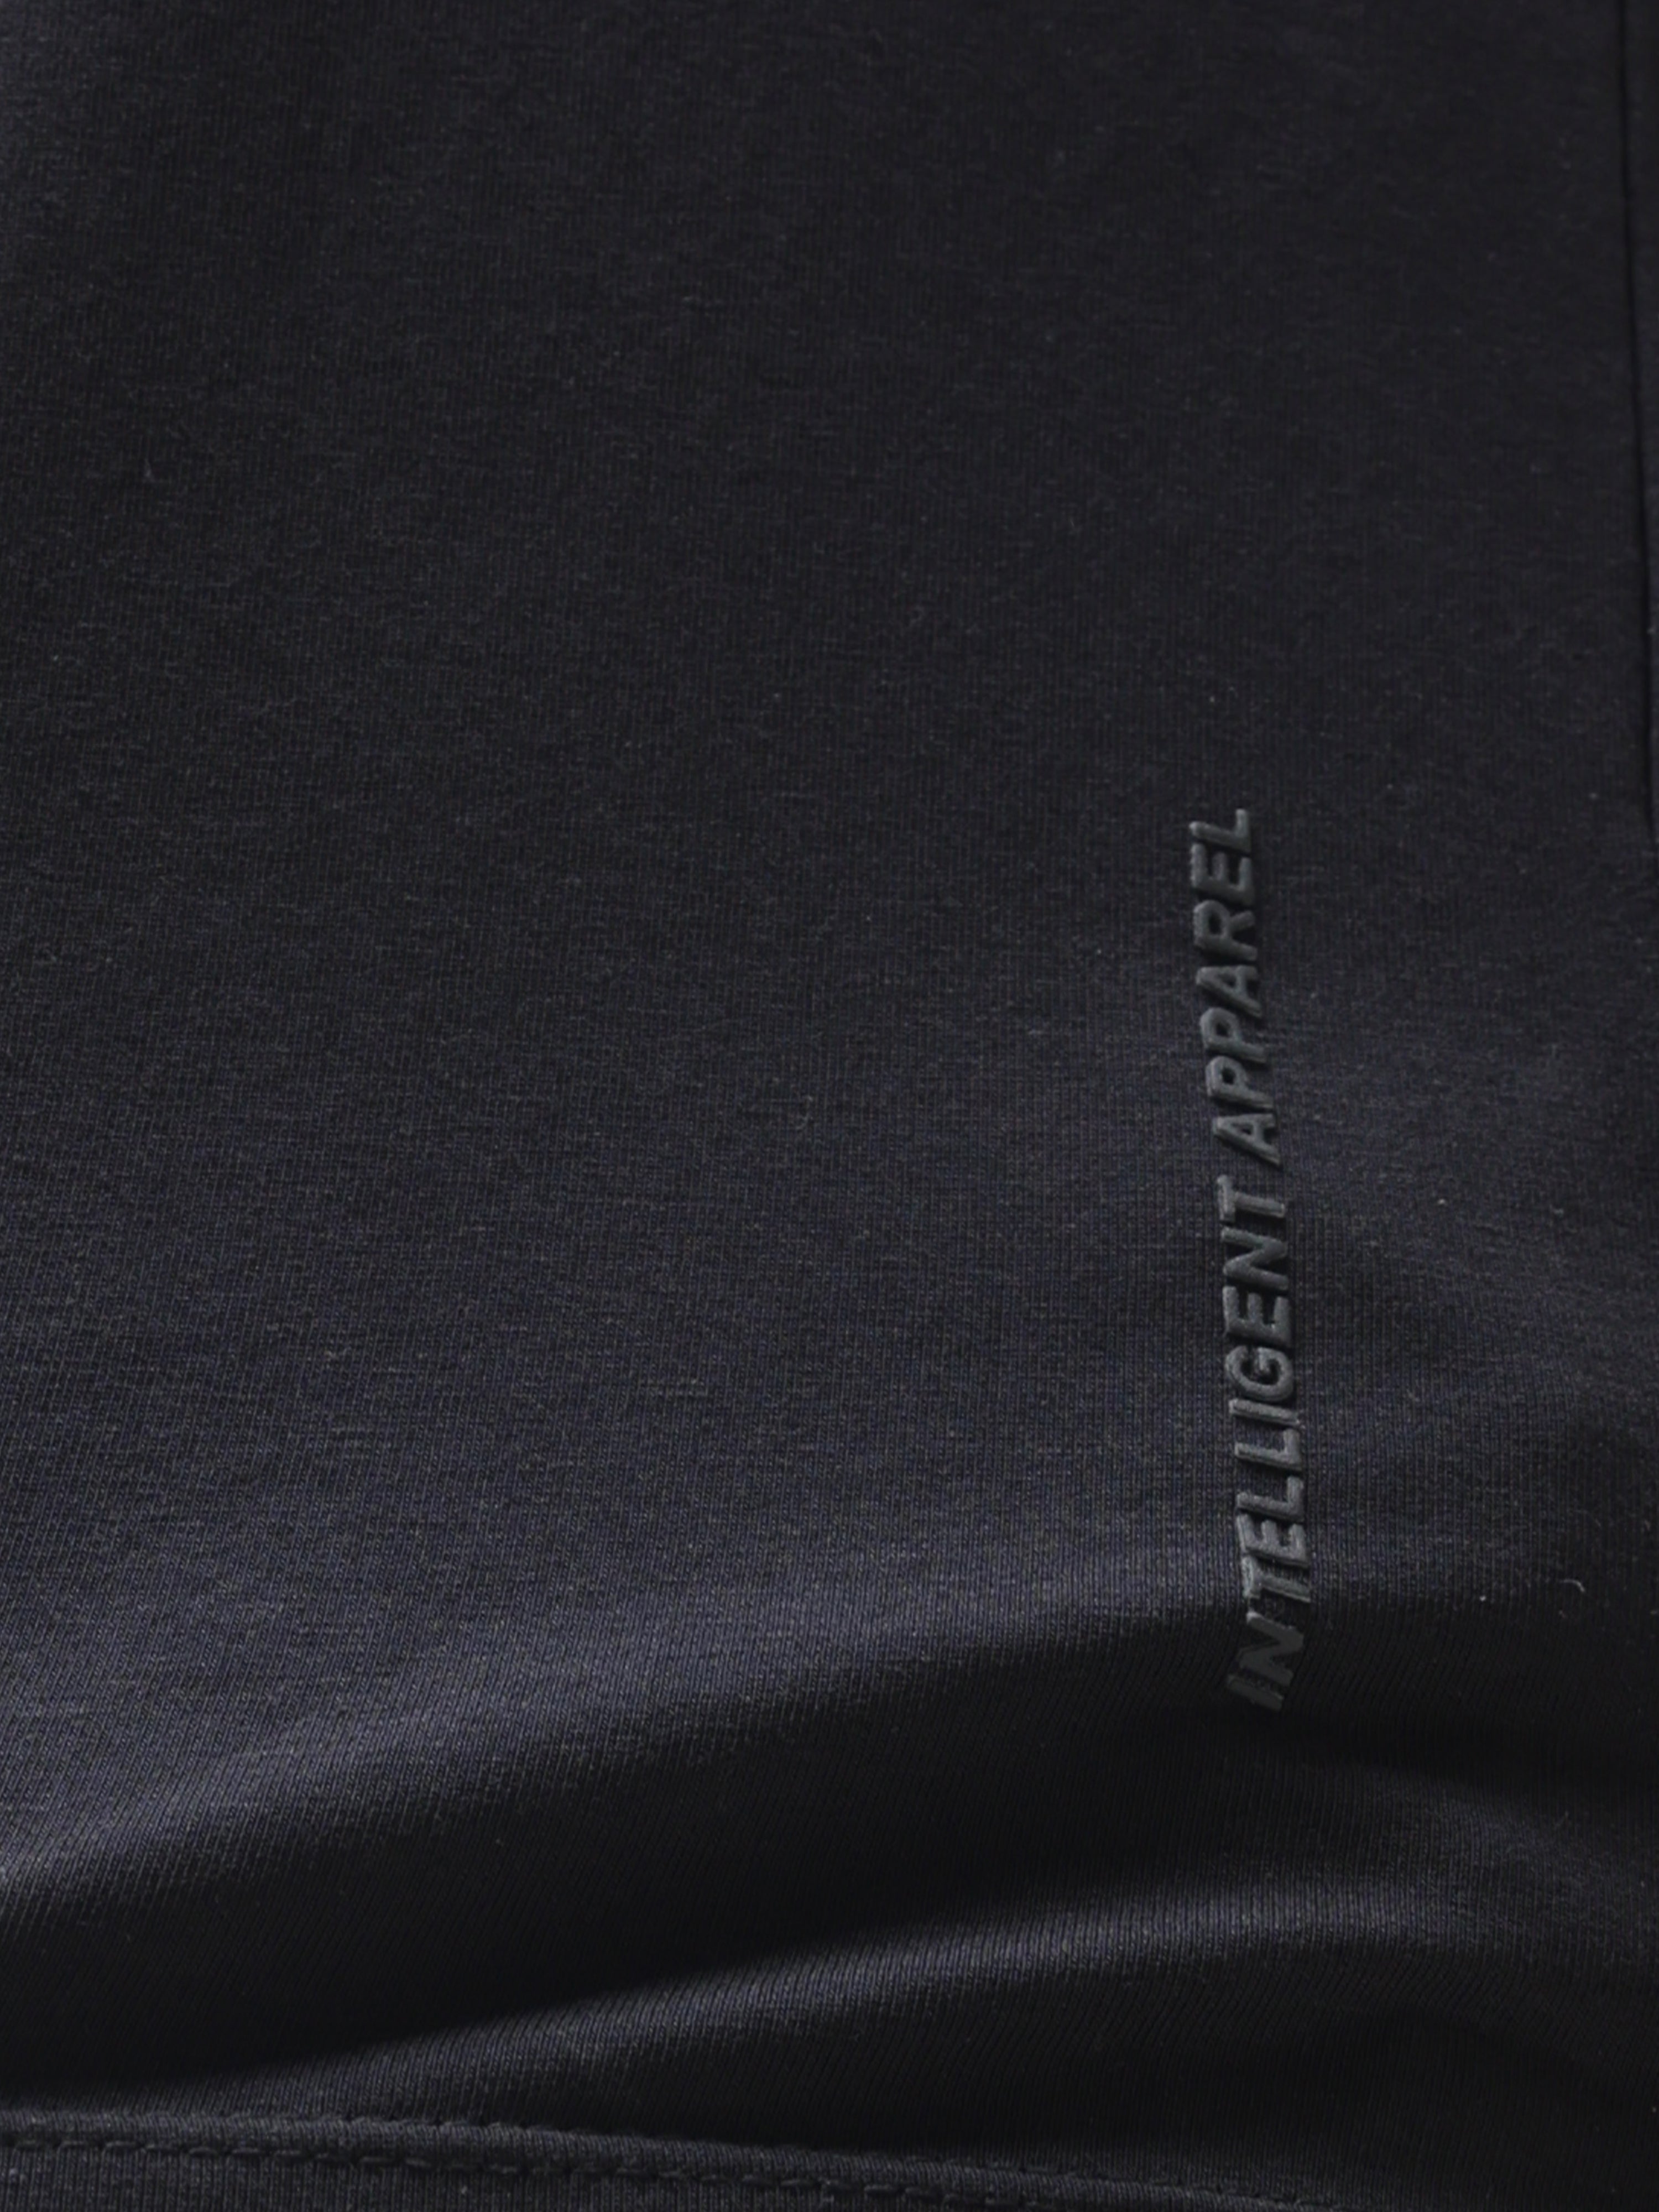 Close-up of Midnight Elegance Turms T-shirt, featuring "Intelligent Apparel" text, showcasing anti-stain, anti-odour, and stretchable fabric.